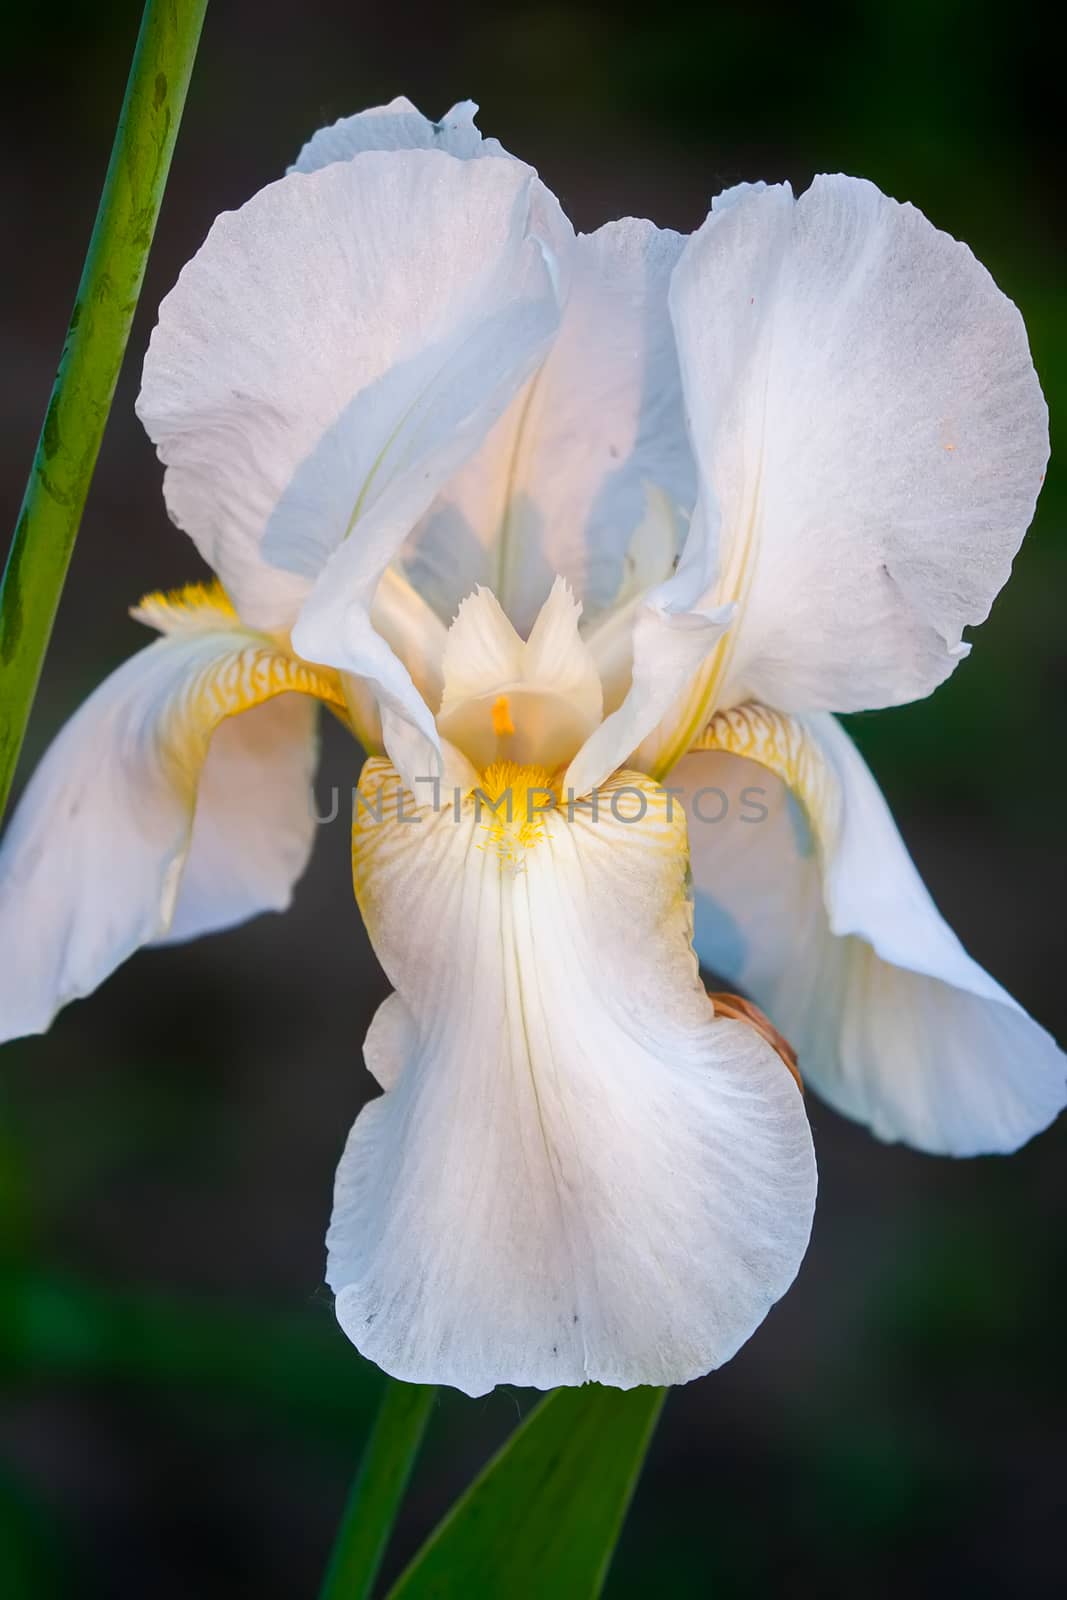 delicate flower of white iris with yellow veins inside and green leaves by Adamchuk